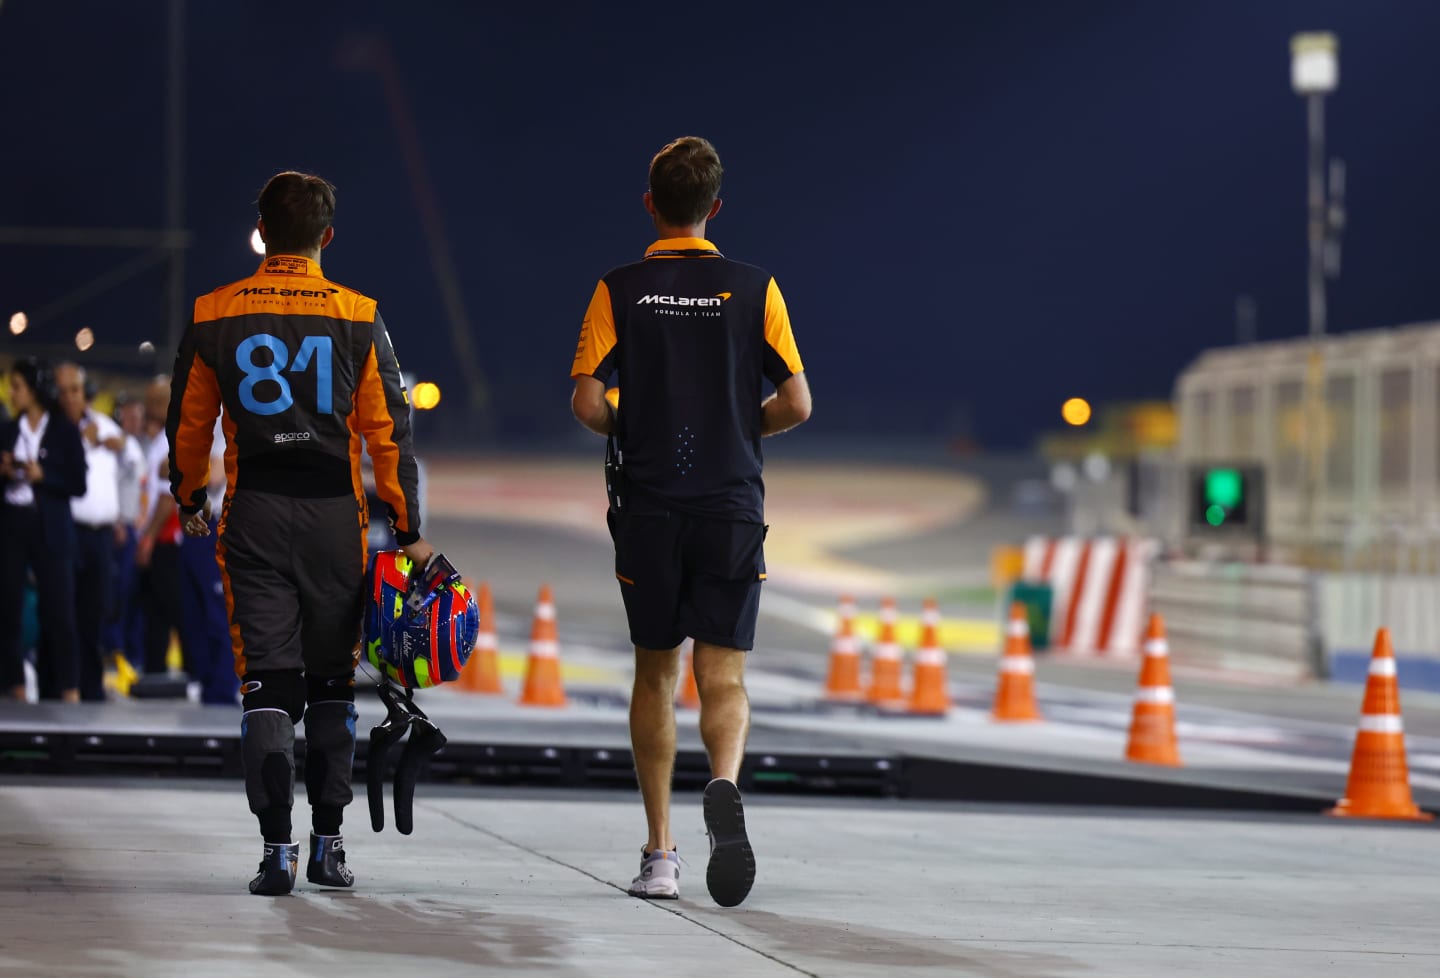 BAHRAIN, BAHRAIN - MARCH 04: 18th placed qualifier Oscar Piastri of Australia and McLaren walks in the Pitlane during qualifying ahead of the F1 Grand Prix of Bahrain at Bahrain International Circuit on March 04, 2023 in Bahrain, Bahrain. (Photo by Mark Thompson/Getty Images)